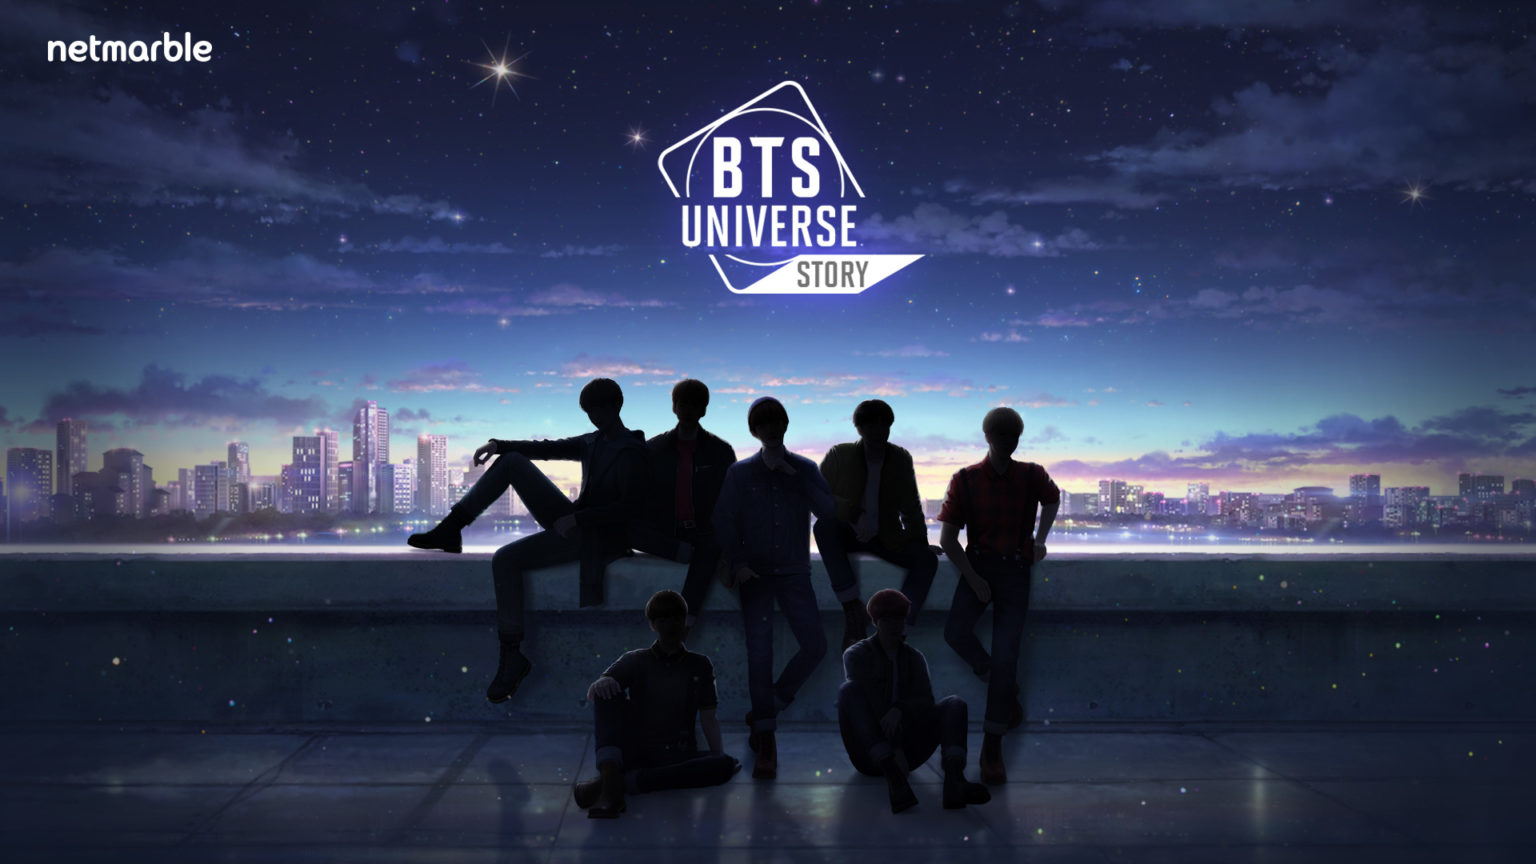 Netmarble Releases a Teaser Website for the Latest Game of BTS Universe Story